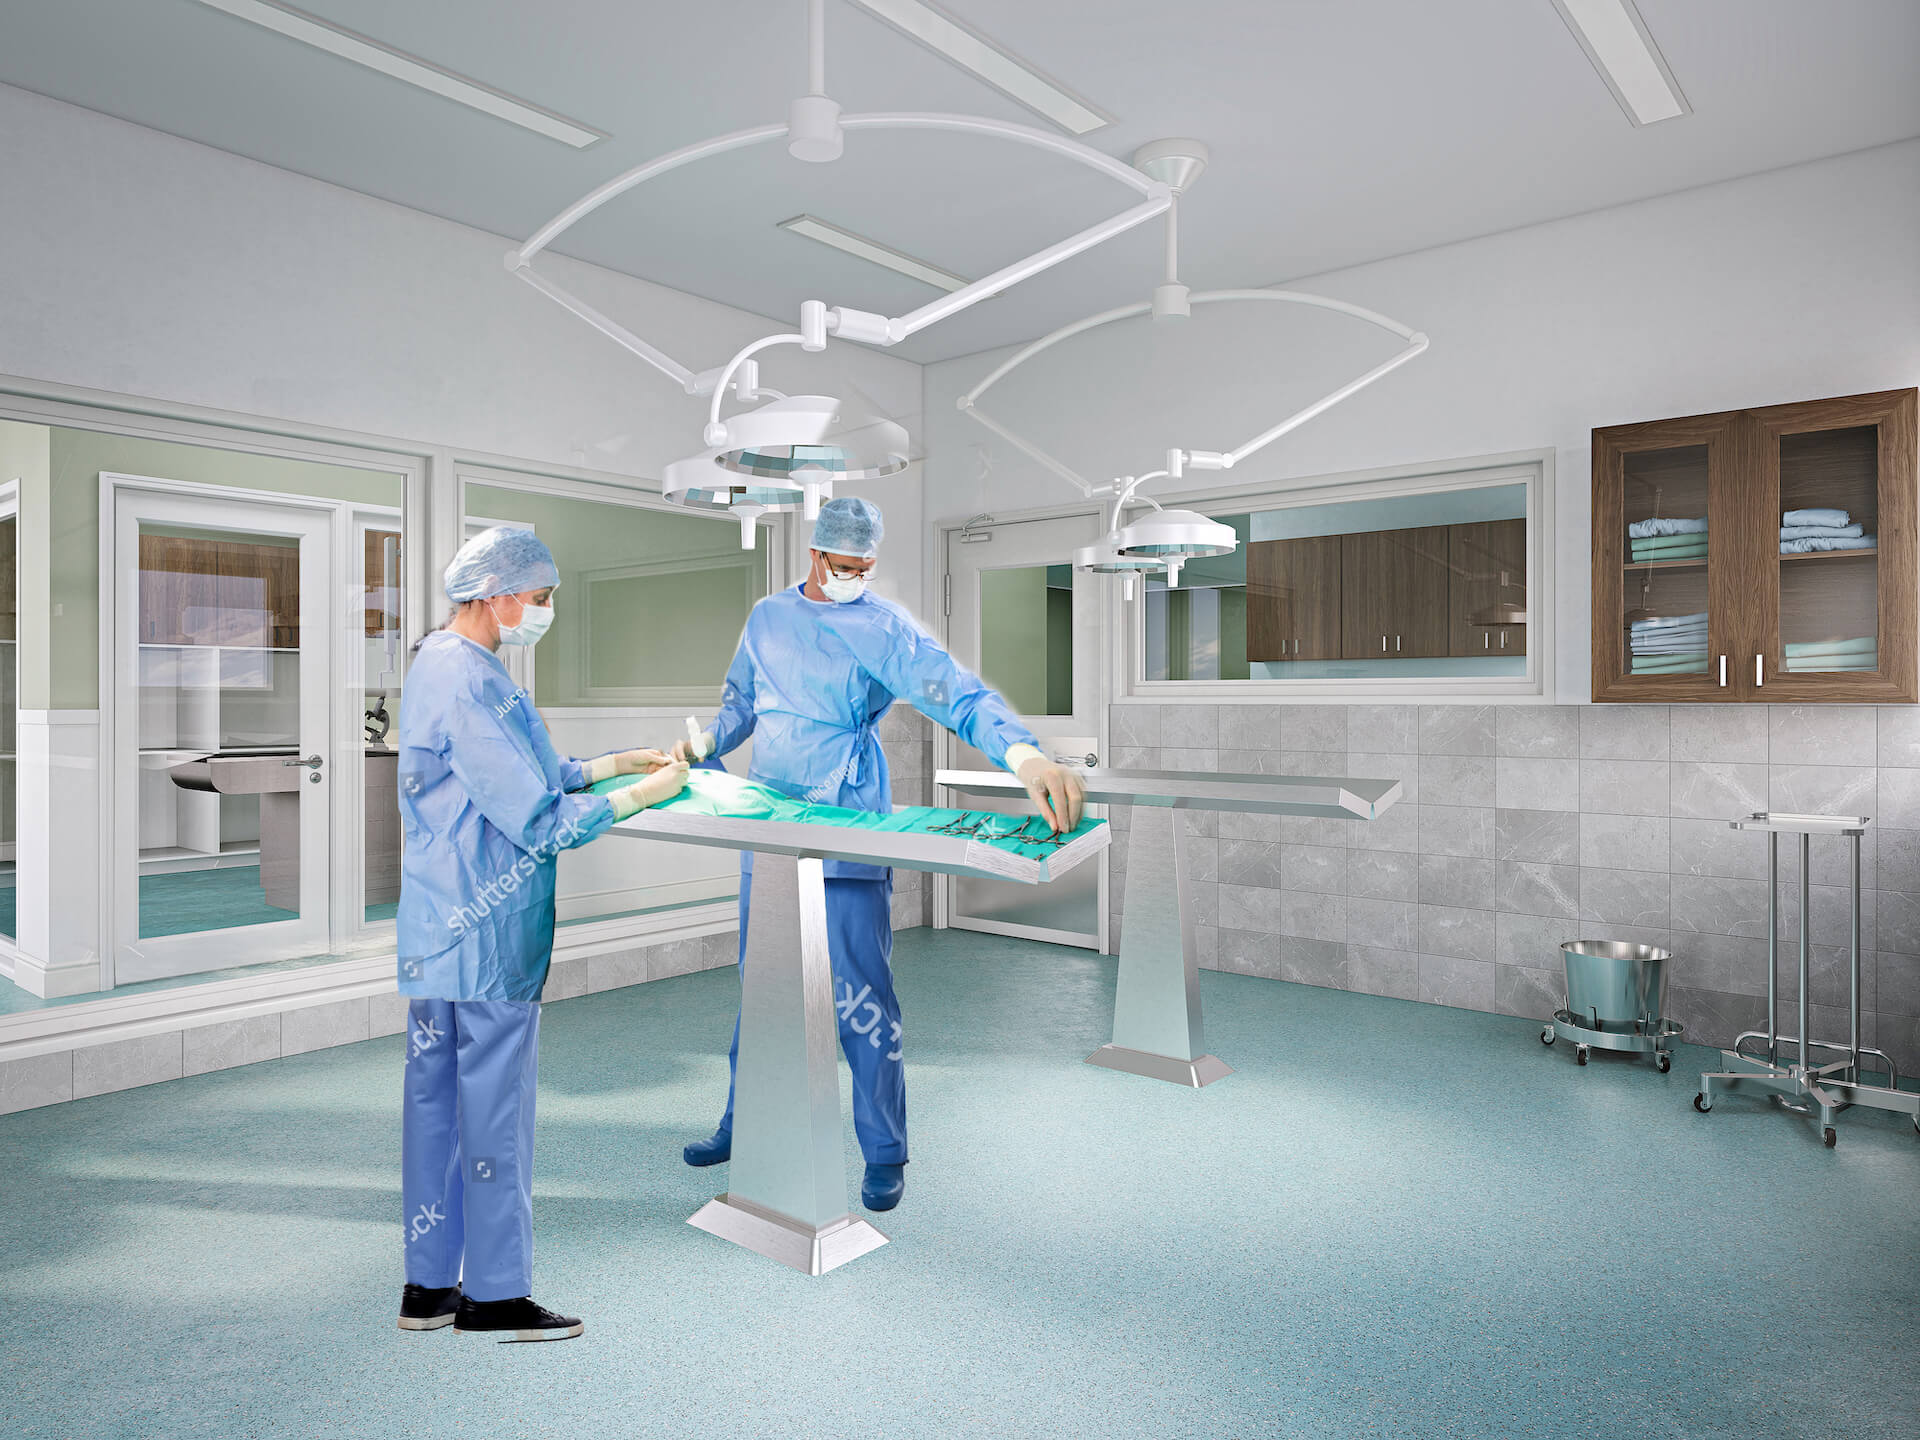 First Draft of Surgery Room Rendering with Post-Production